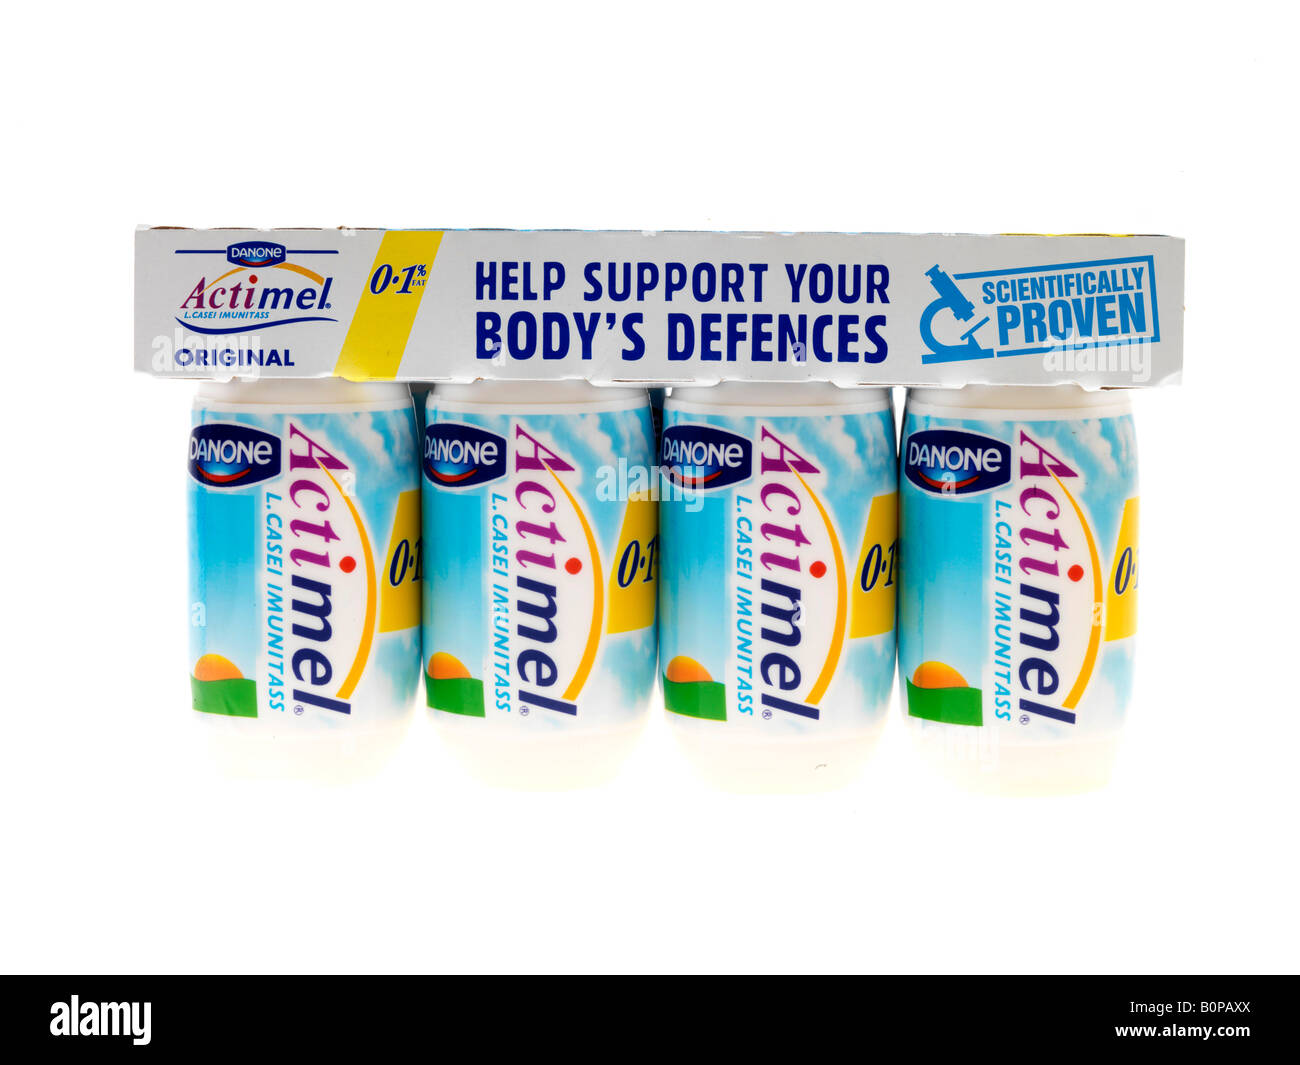 Actimel hi-res stock photography - Alamy images and